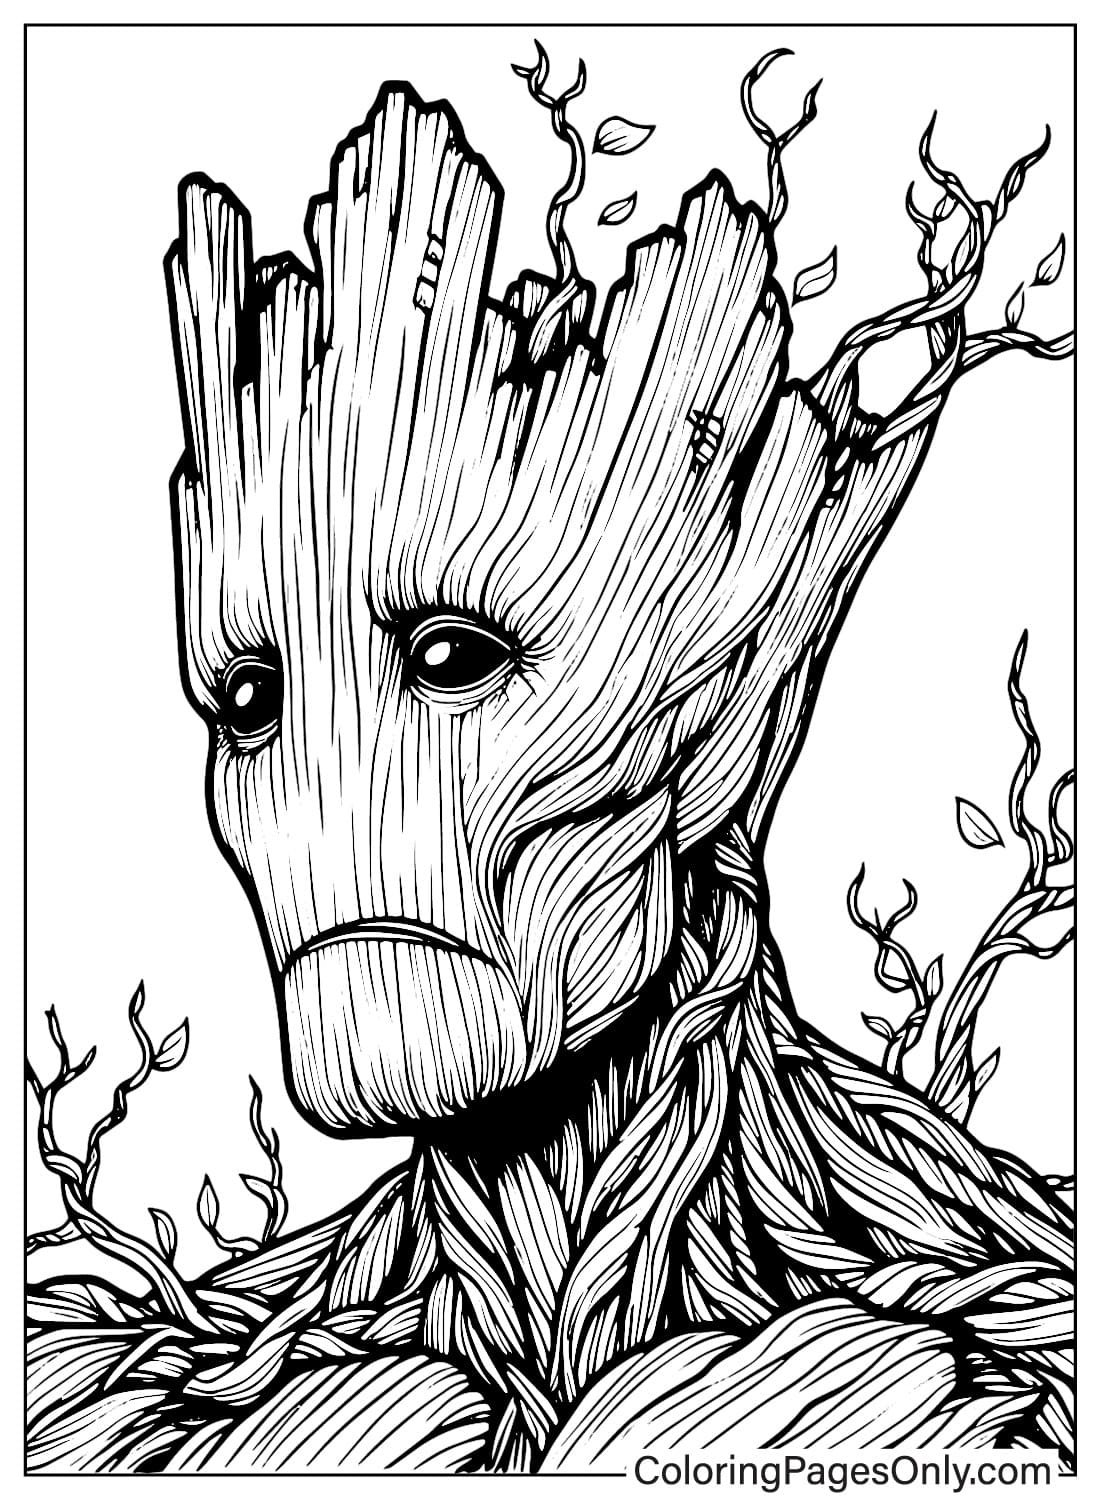 Coloring Sheet Groot from Groot